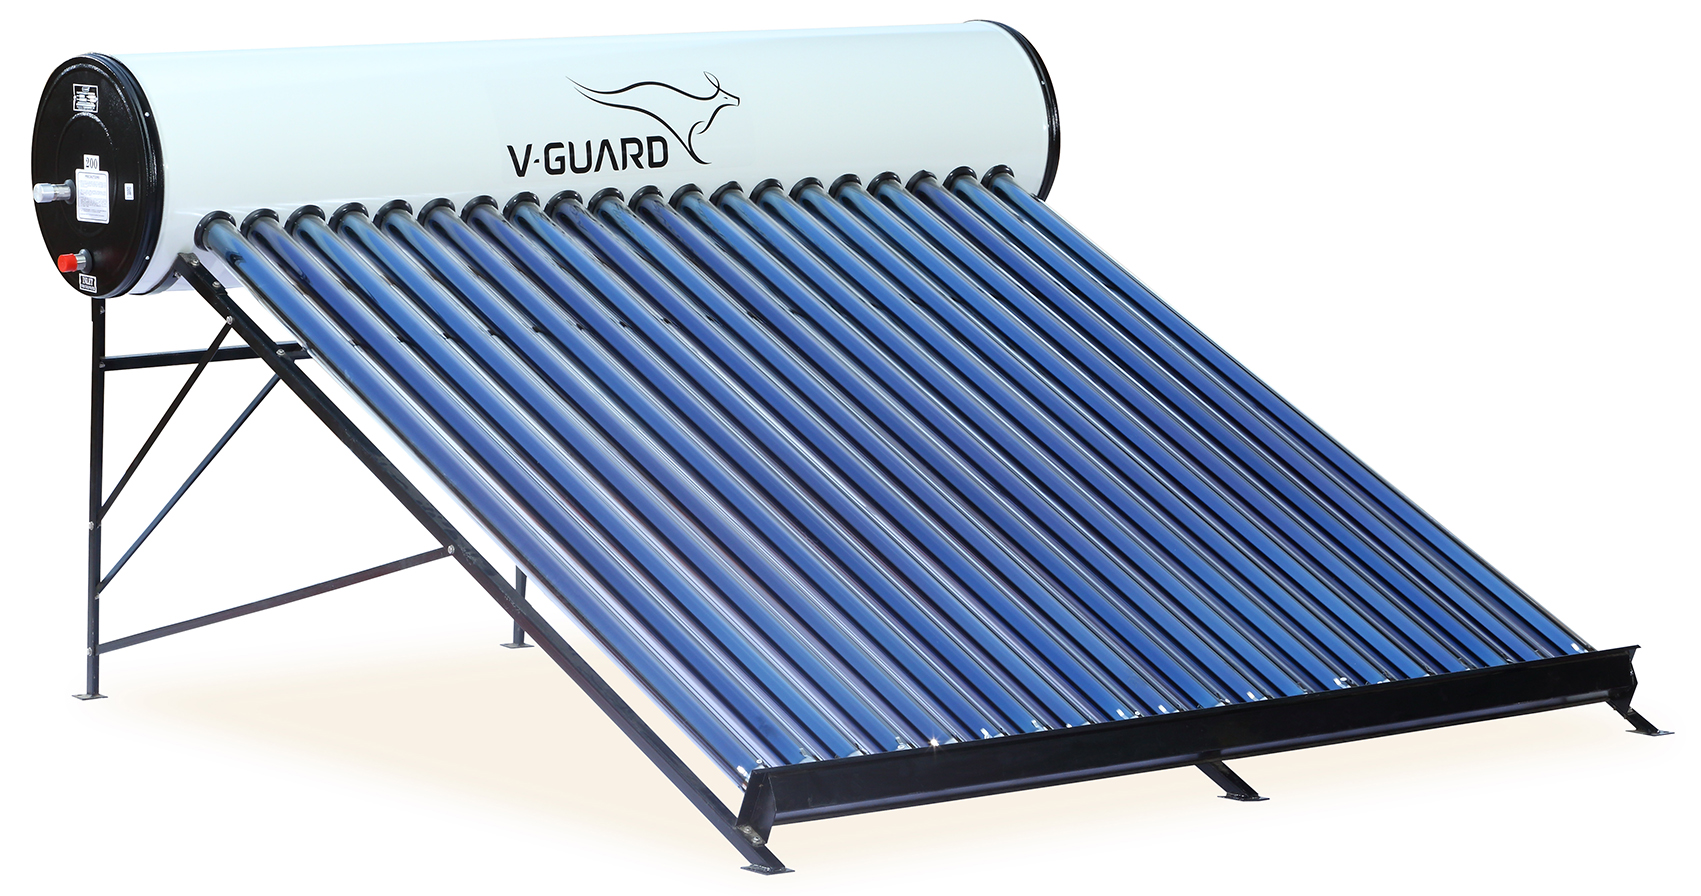 This winter, bring home the warmth with V-Guard Solar Water Heaters